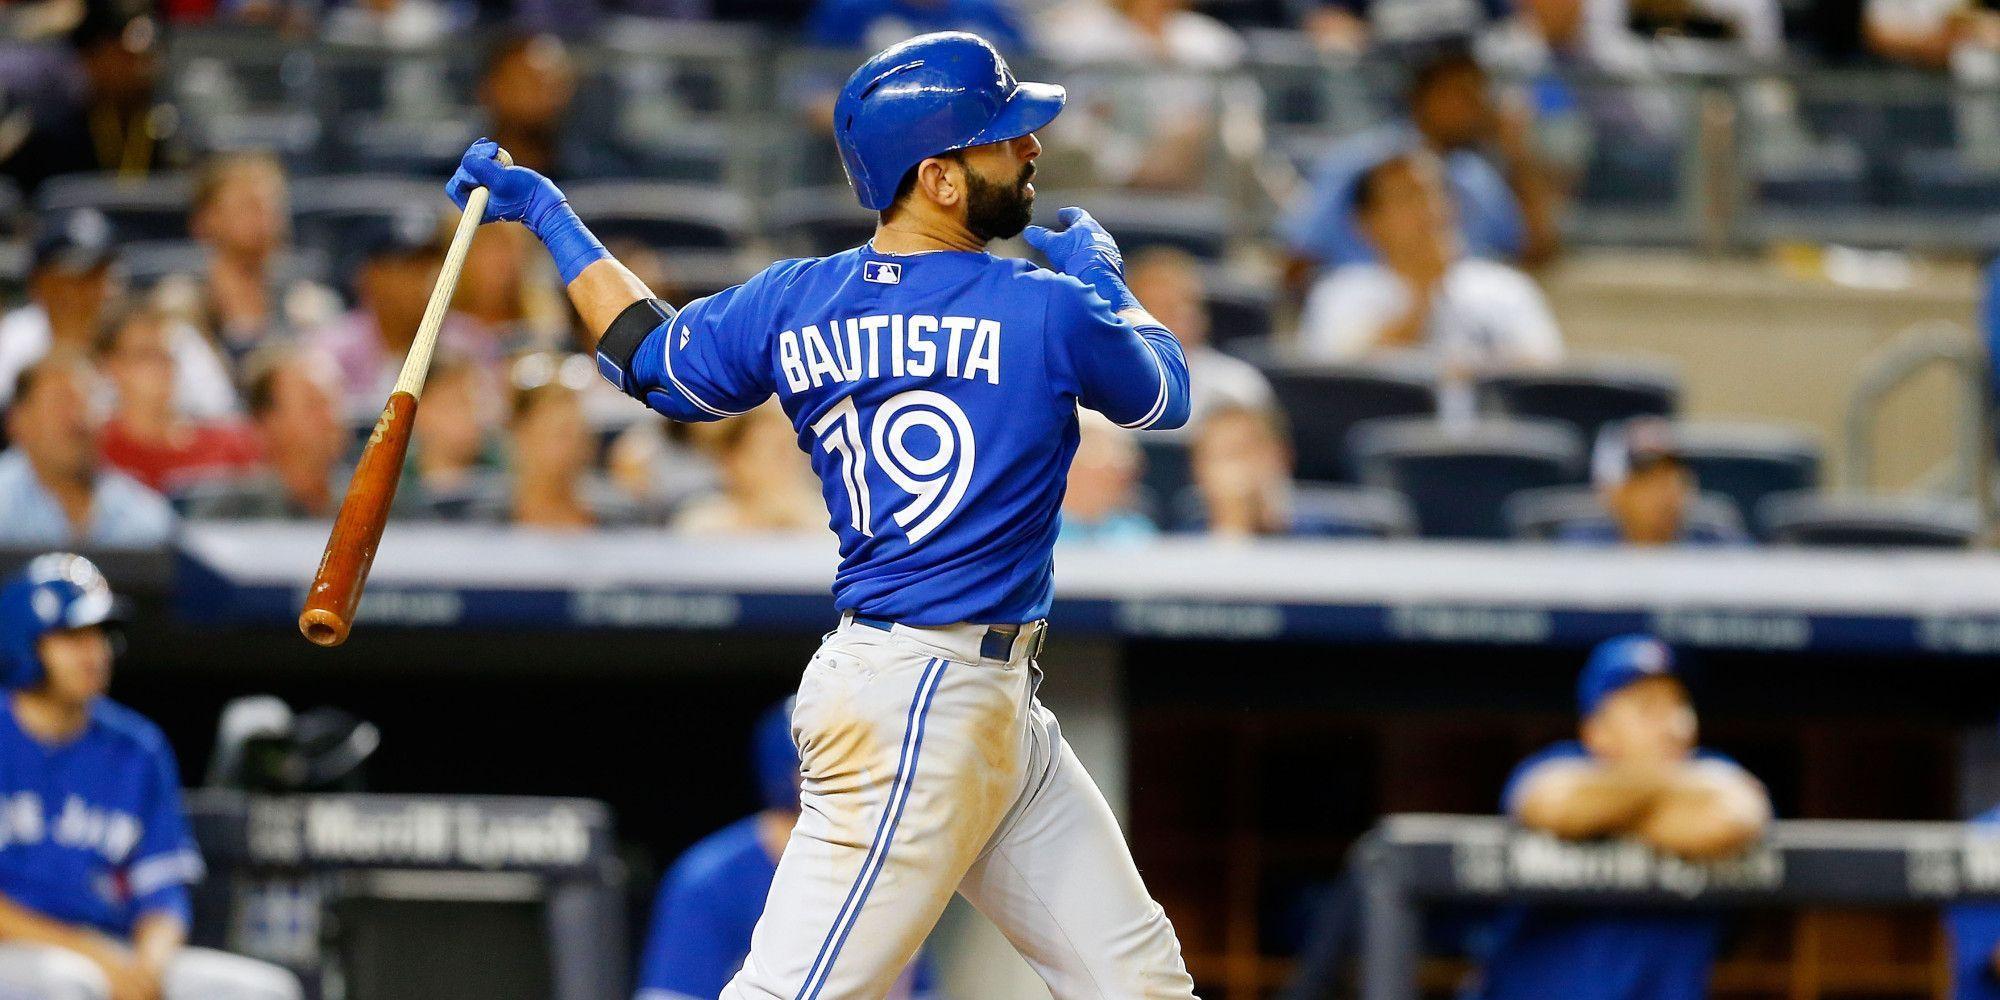 Toronto Blue Jays Video Of EVERY Home Run In 2015 Is Mesmerizing